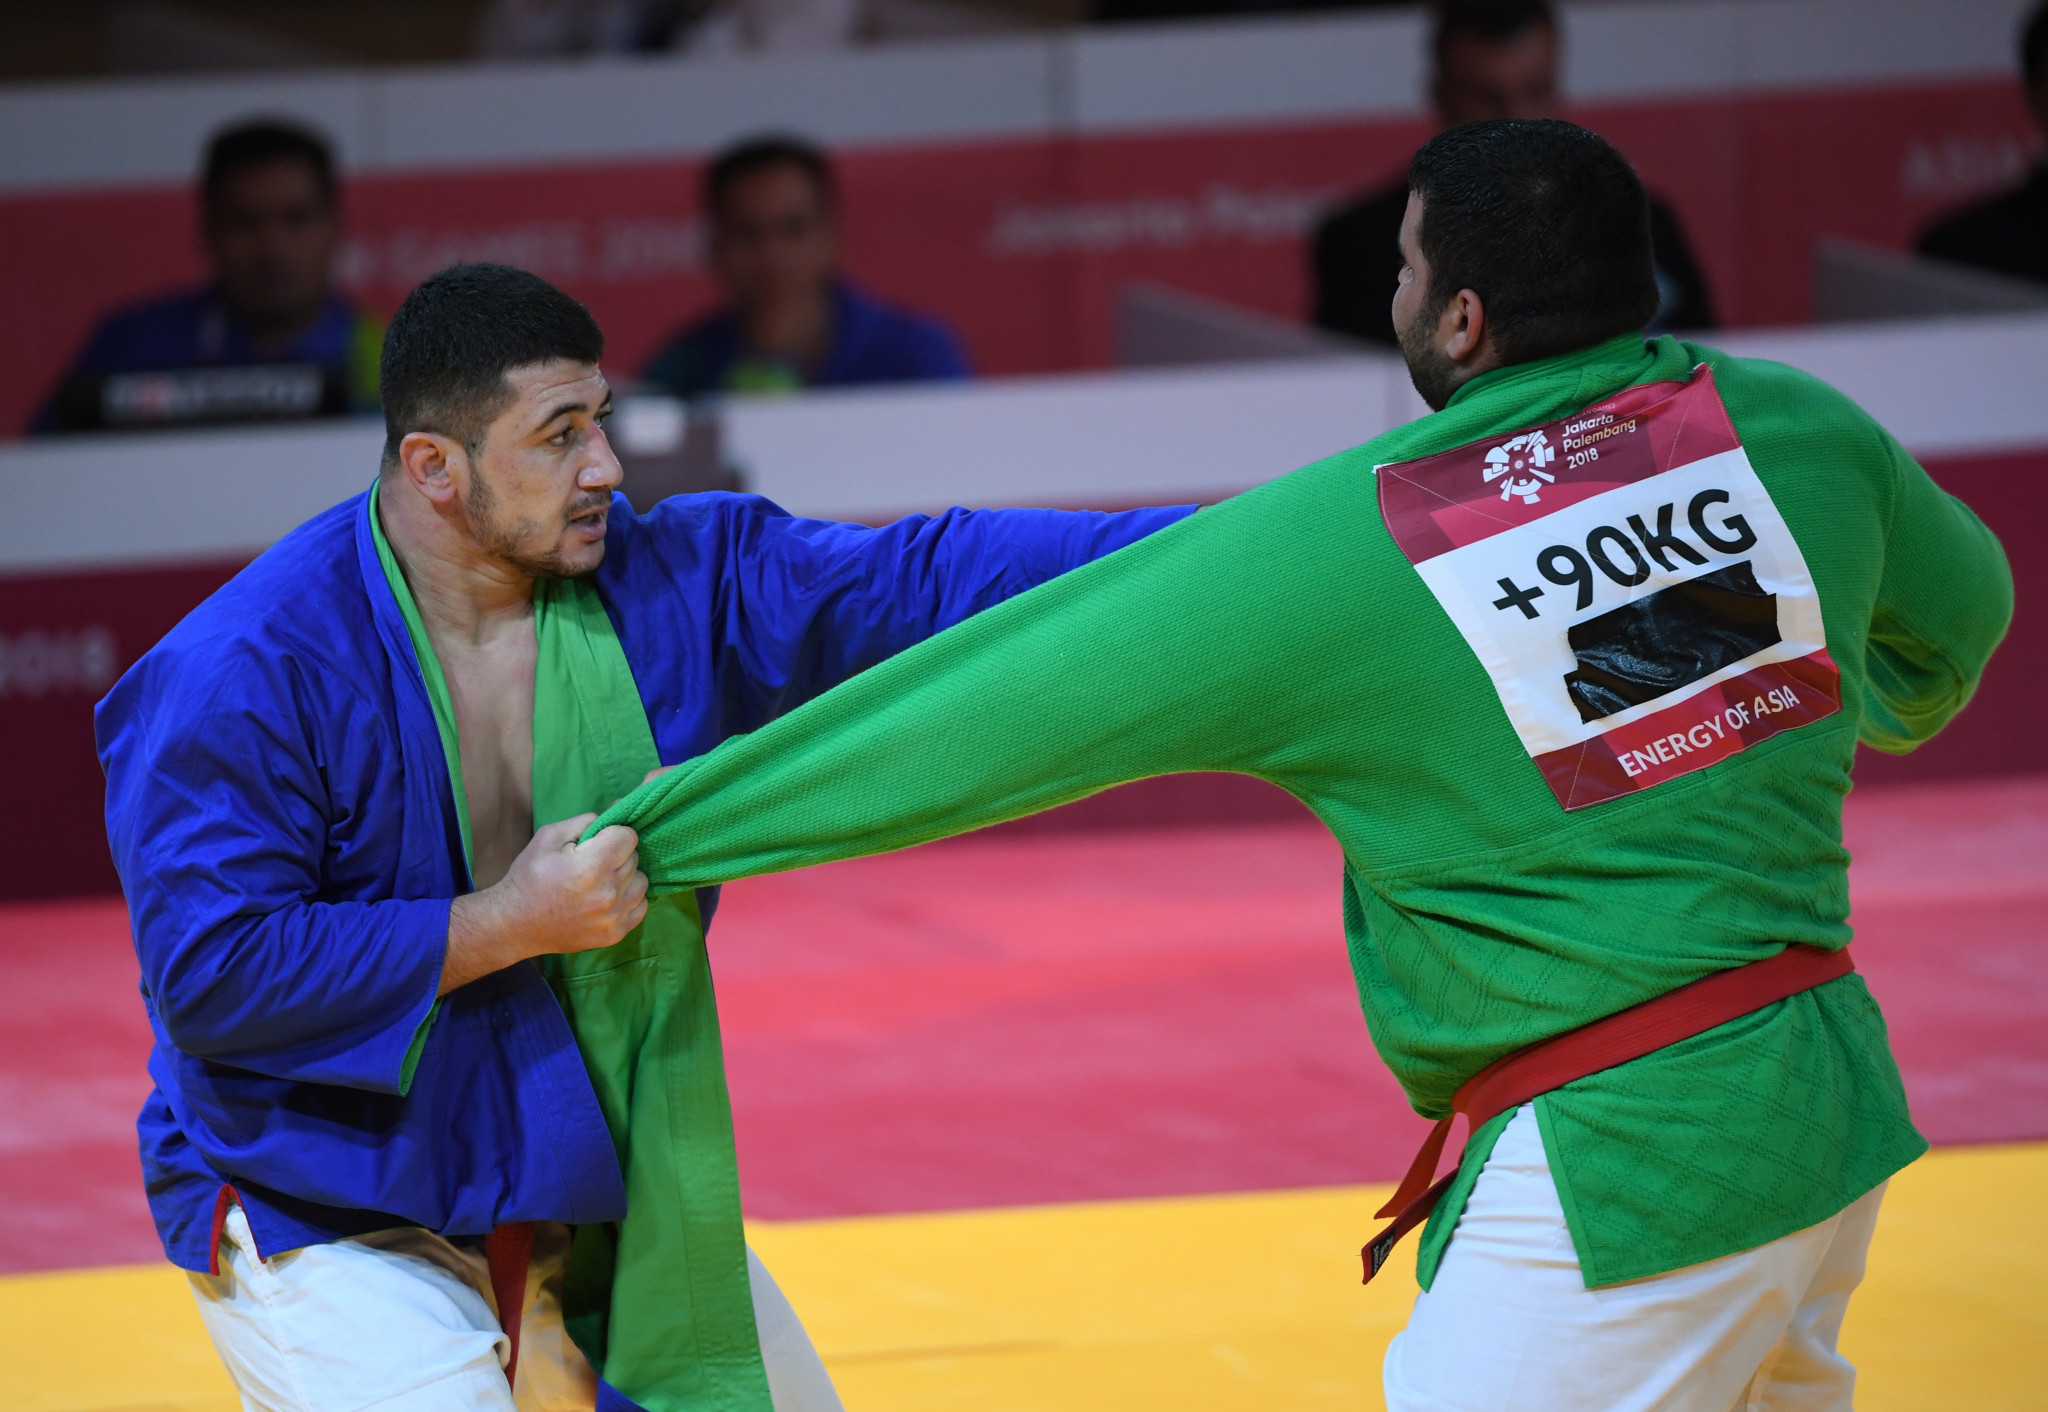 Mukhsin Khisomiddinov beat Iran's Jafar Pahlevanijaghargh in the men's over-90 kilograms final to help Uzbekistan to a clean sweep of the first three kurash gold medals to be awarded ©Getty Images